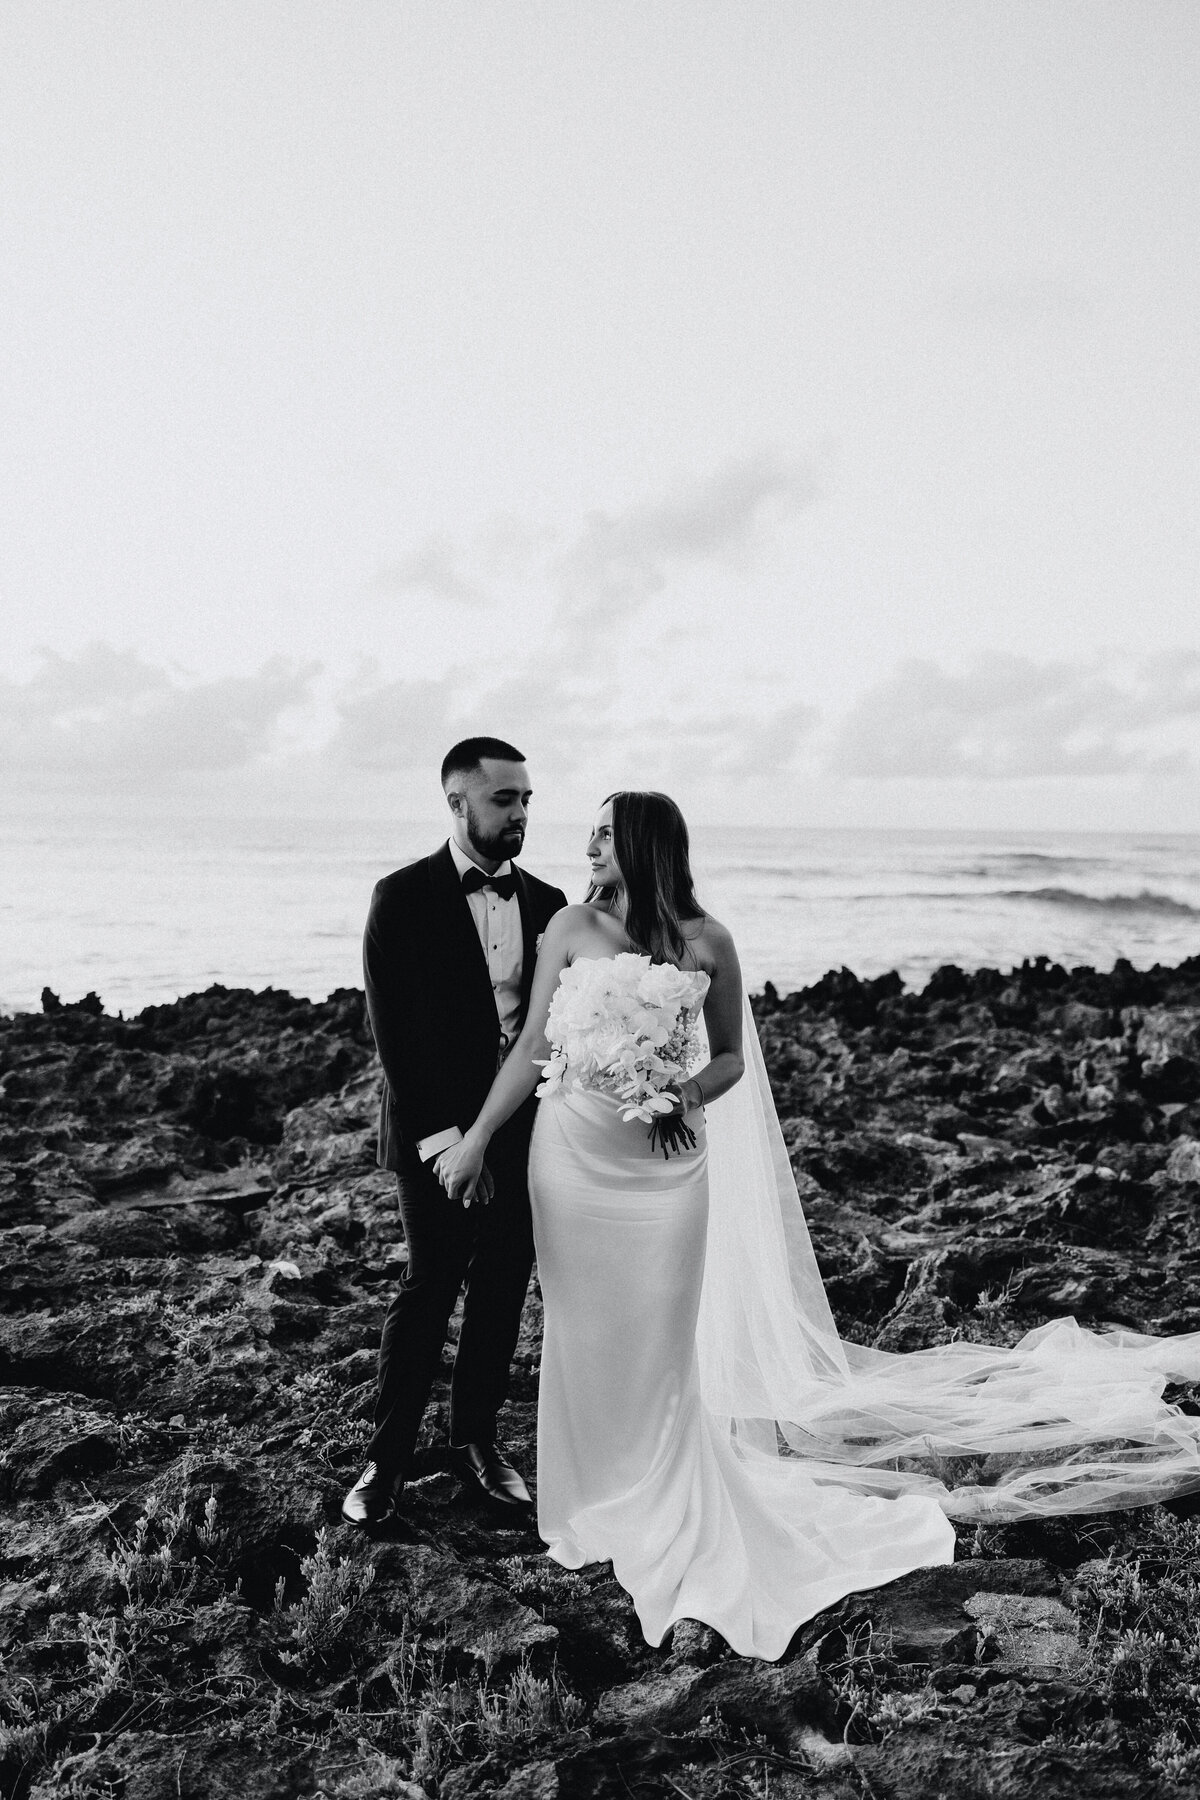 Wedding photography, bride and groom couples portrait on the rocks holding hands in black and white